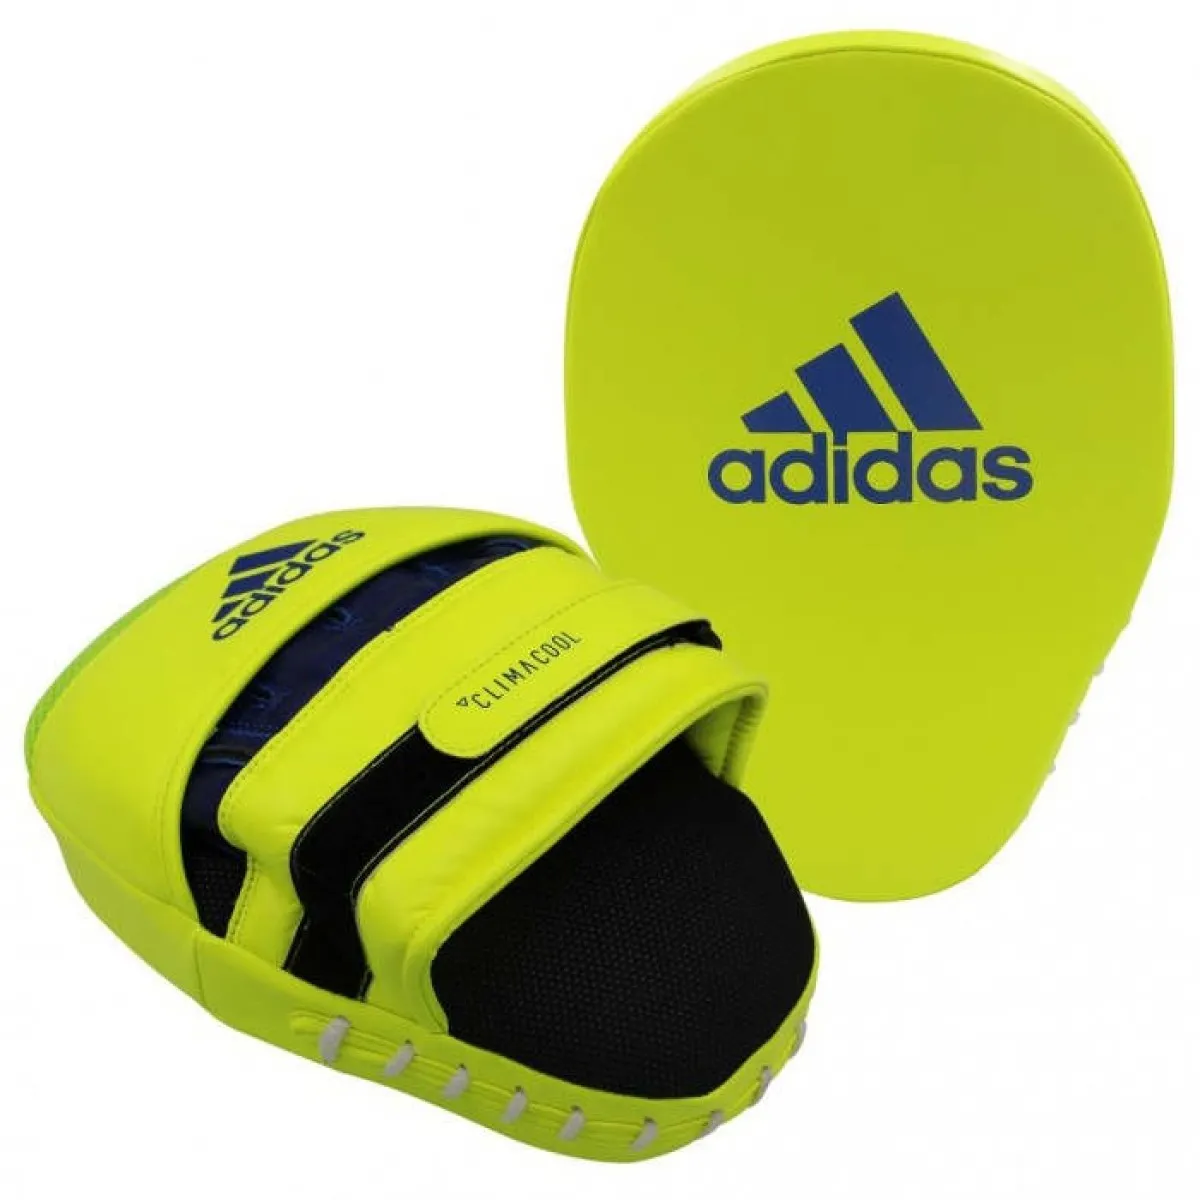 adidas hand claw Focus short curved yellow